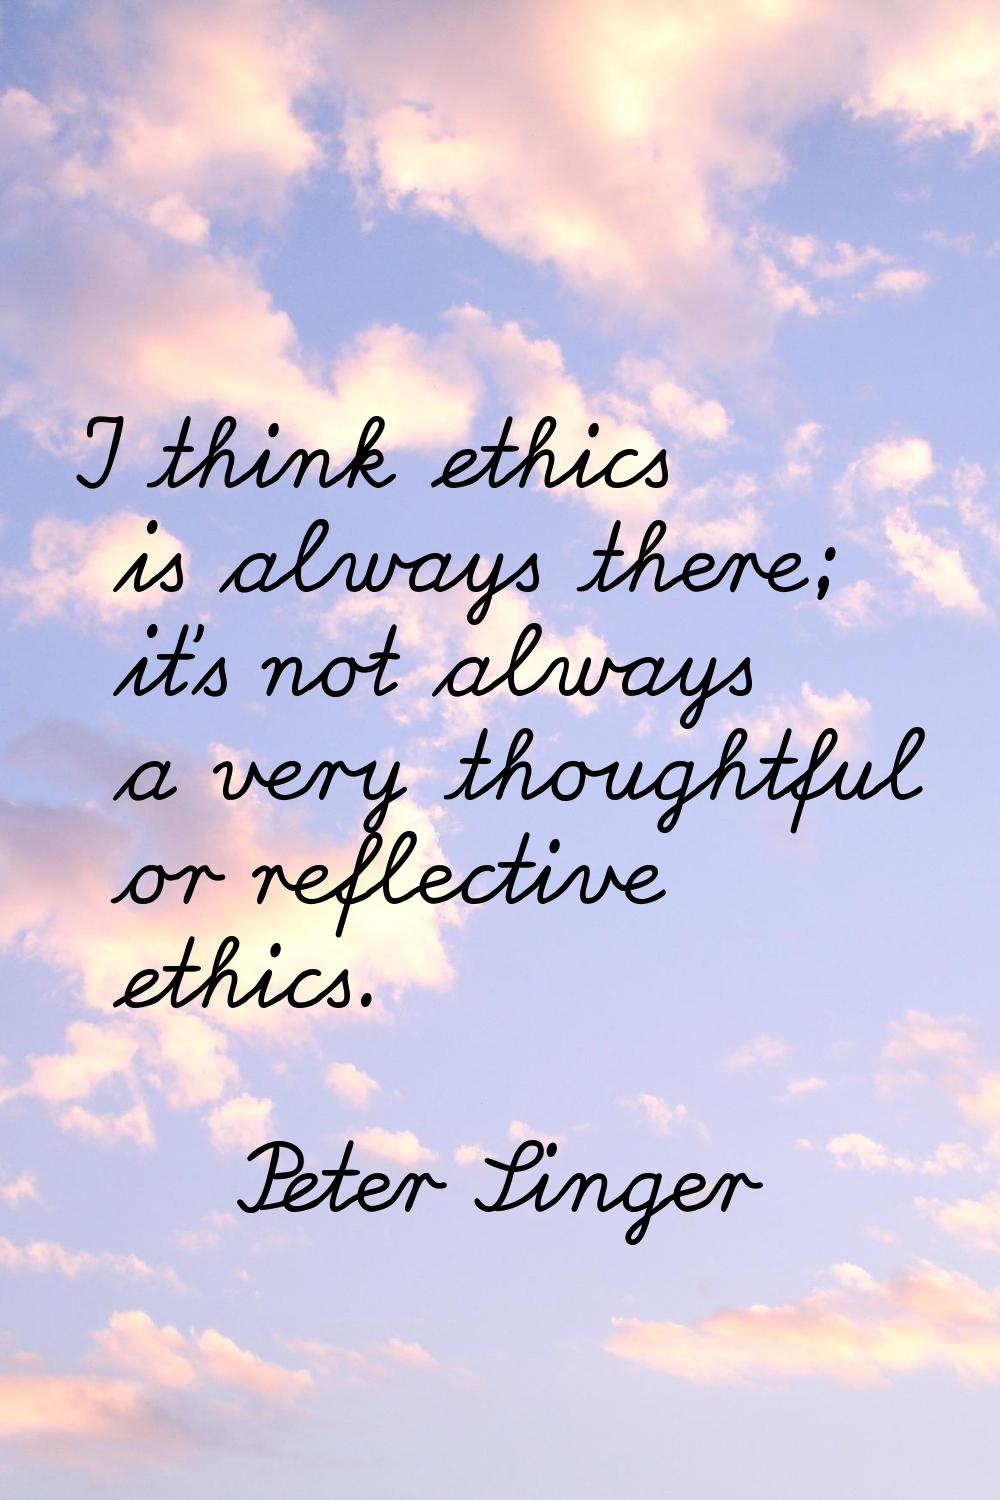 I think ethics is always there; it's not always a very thoughtful or reflective ethics.